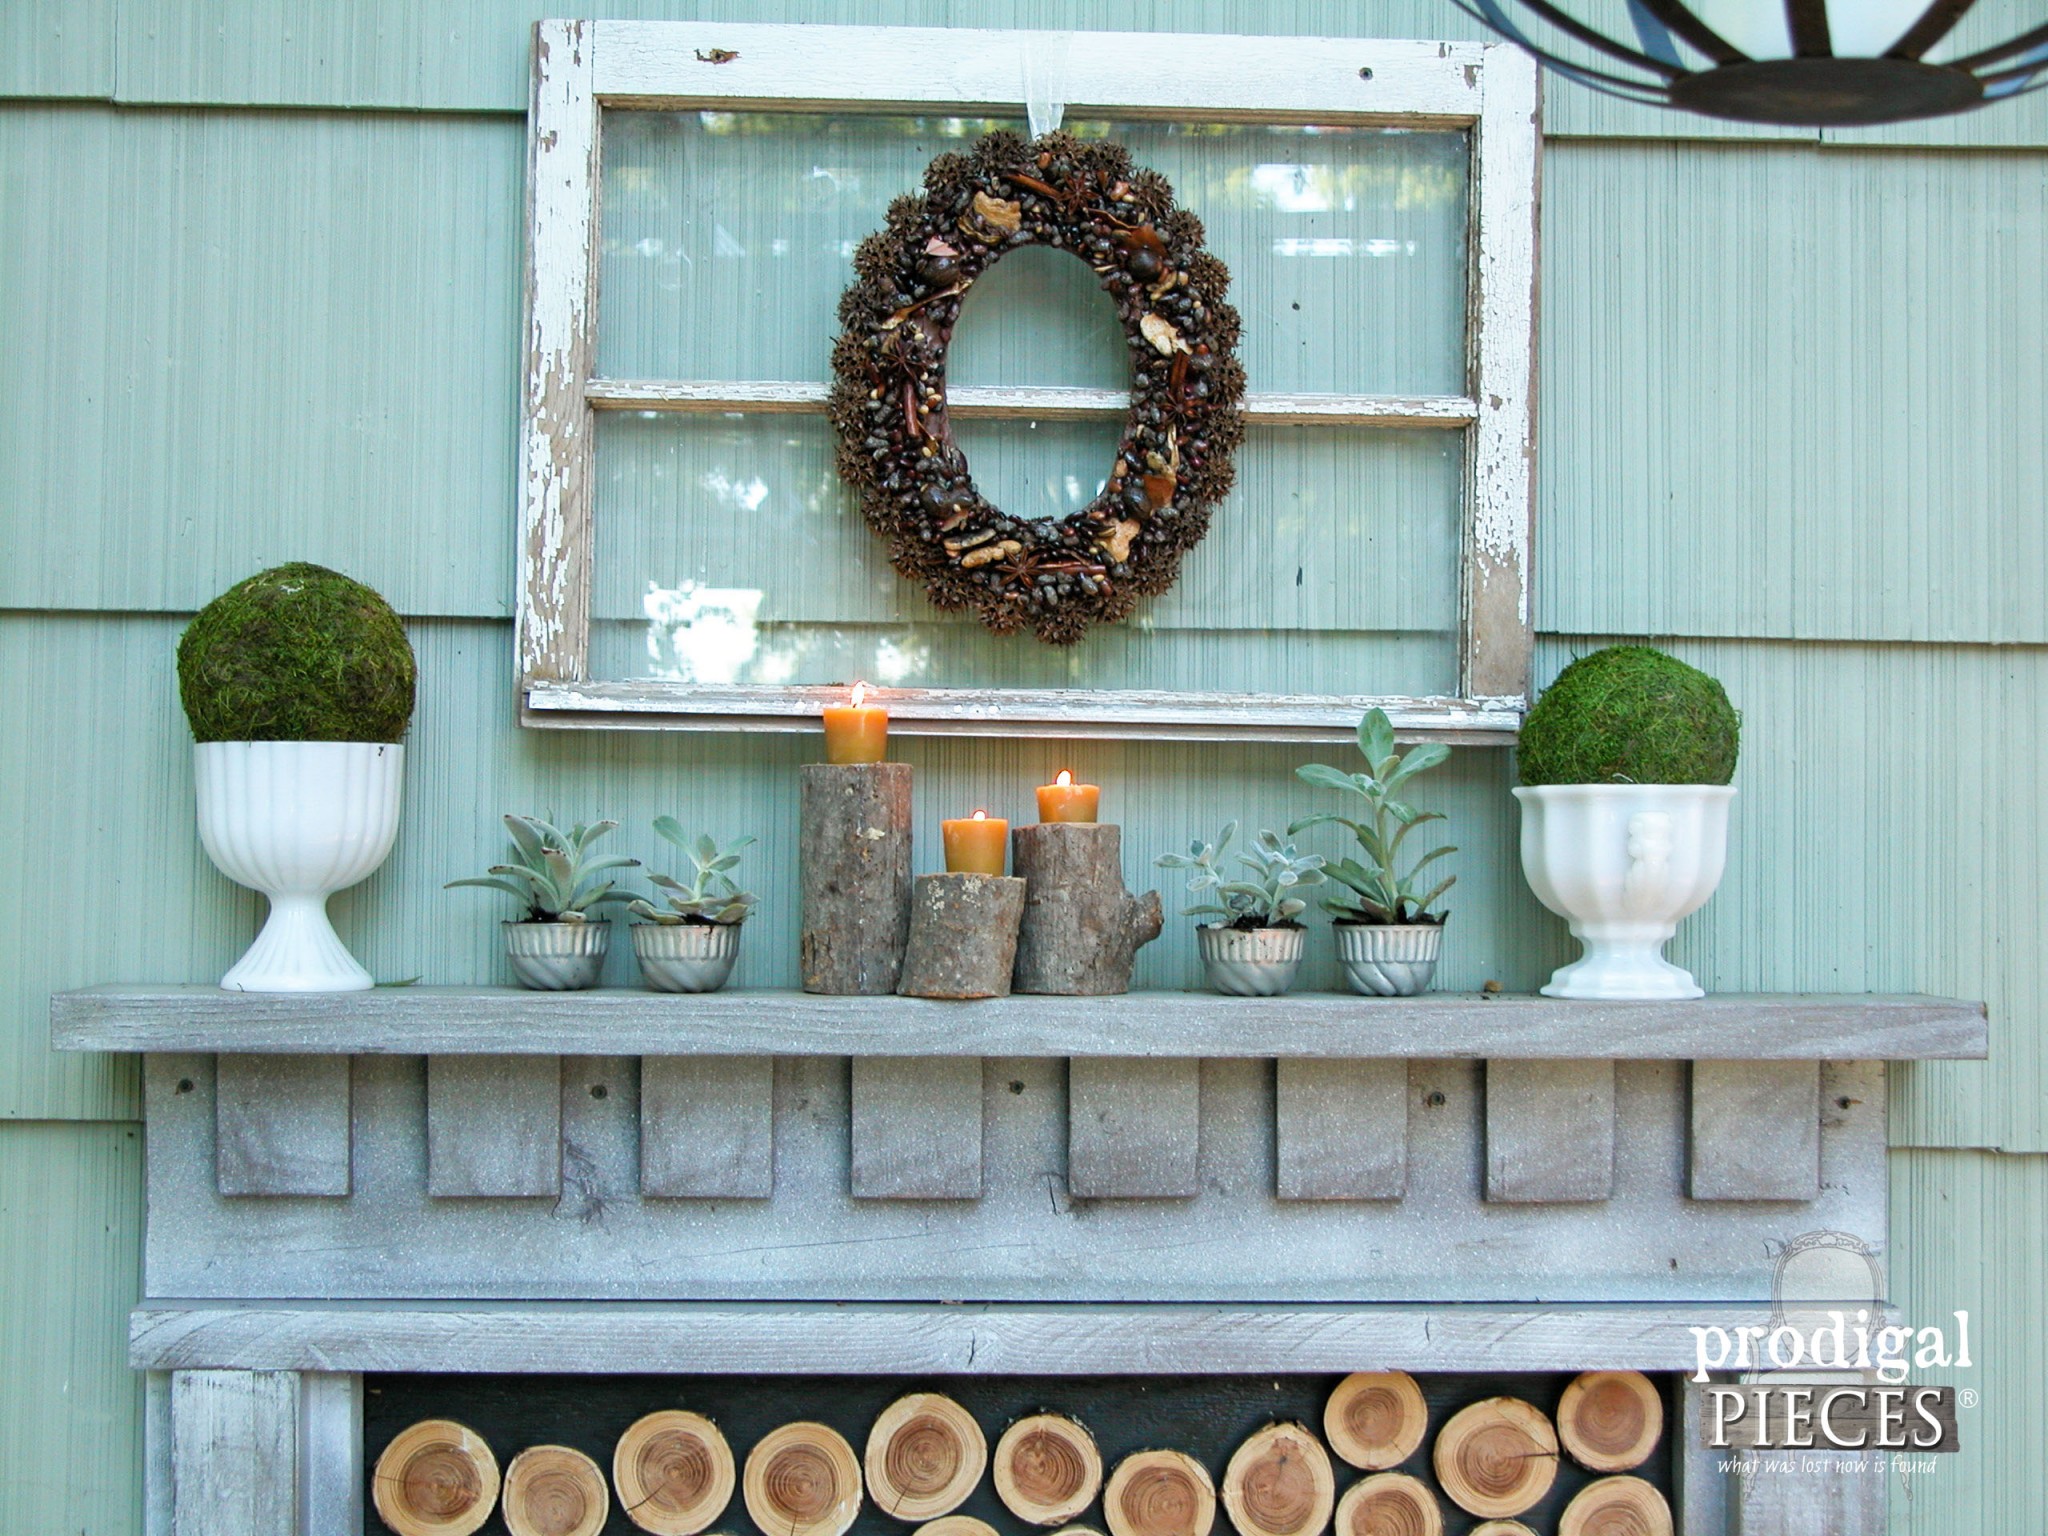 Rustic DIY Fireplace Mantel with Log Candlesticks by Prodigal Pieces | www.prodigalpieces.com